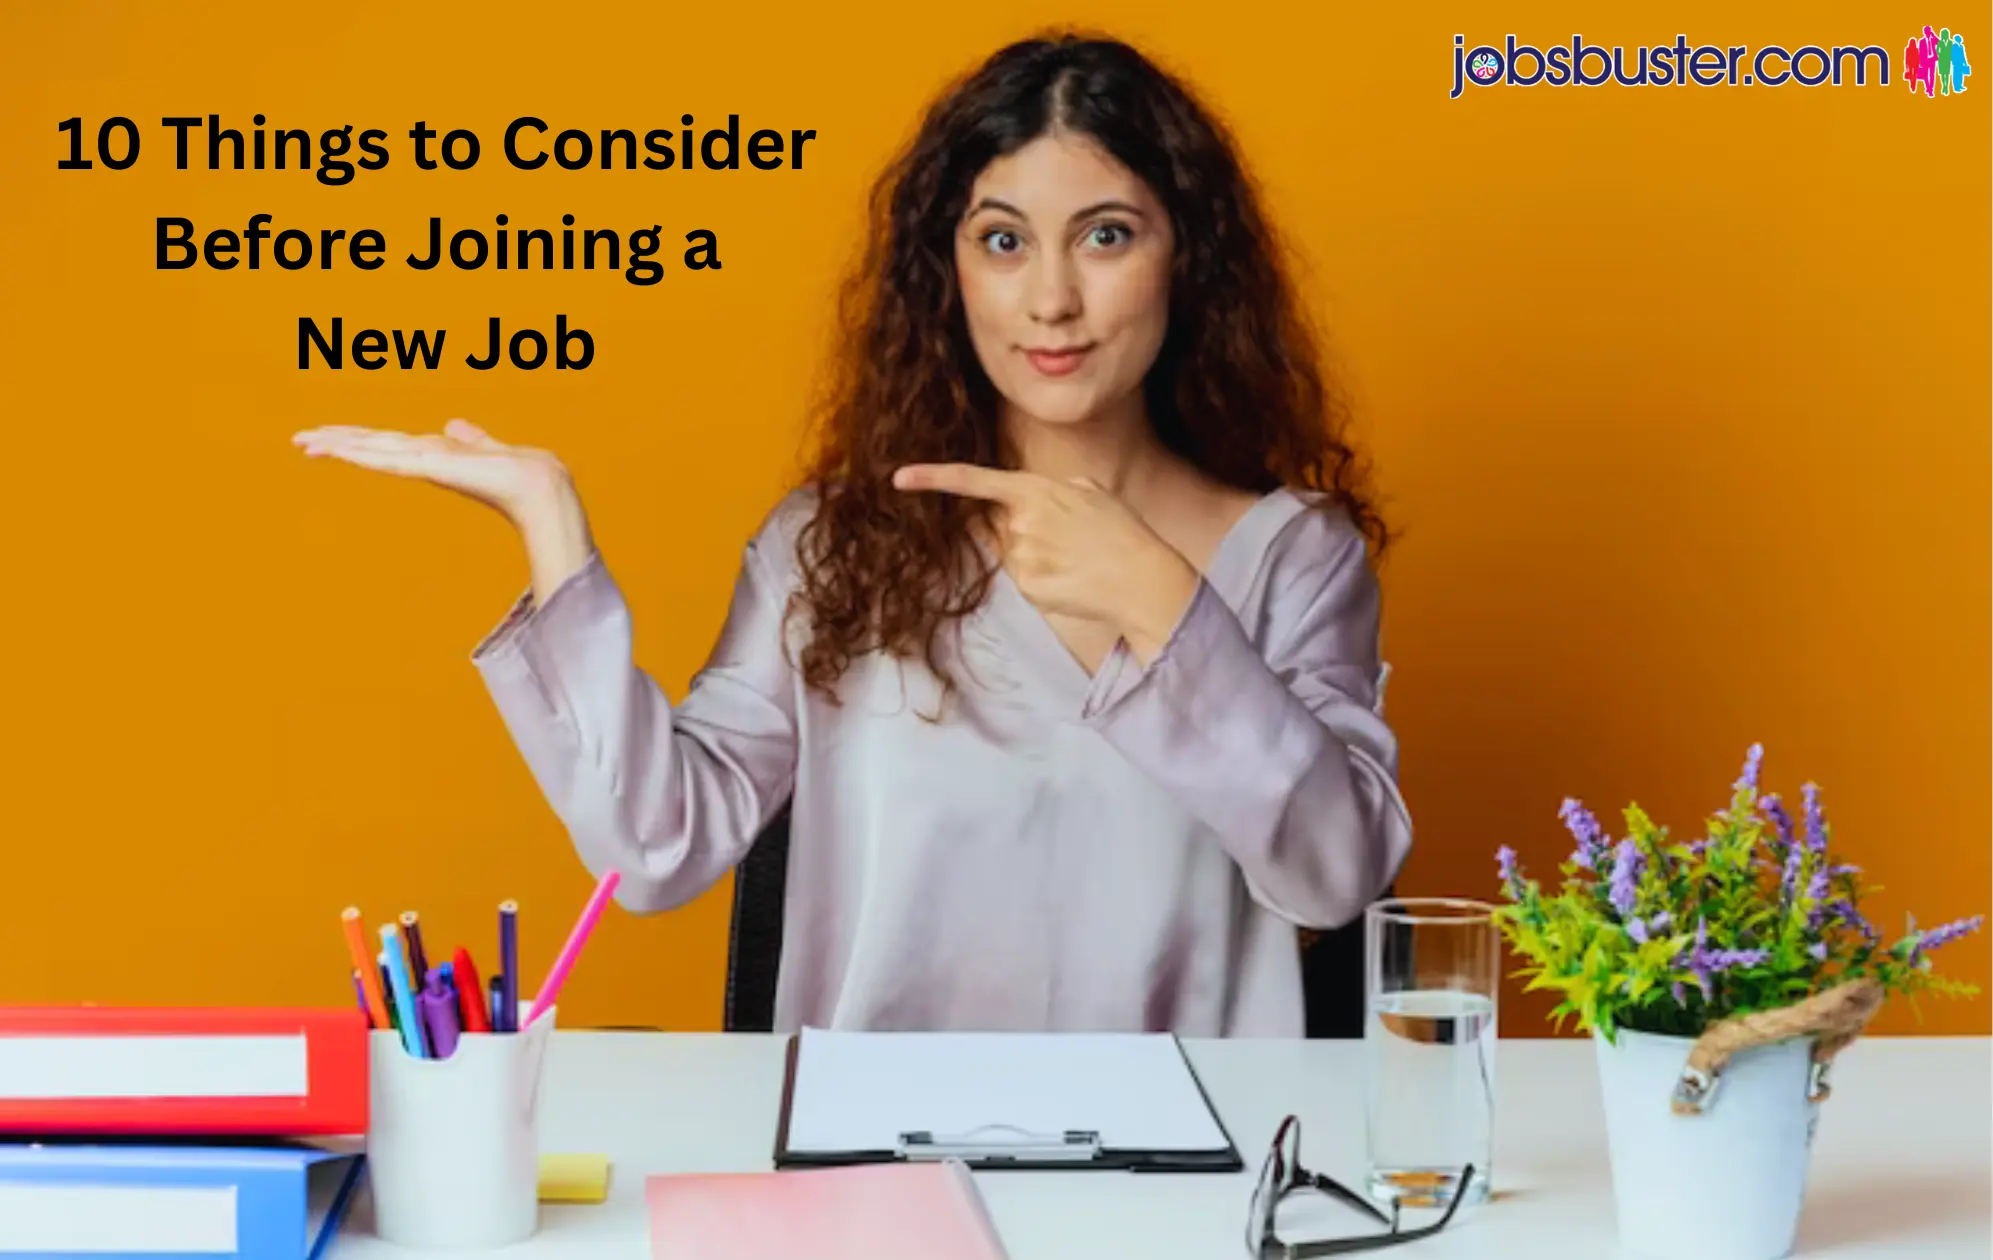 10 Things to Consider Before Joining a New Job